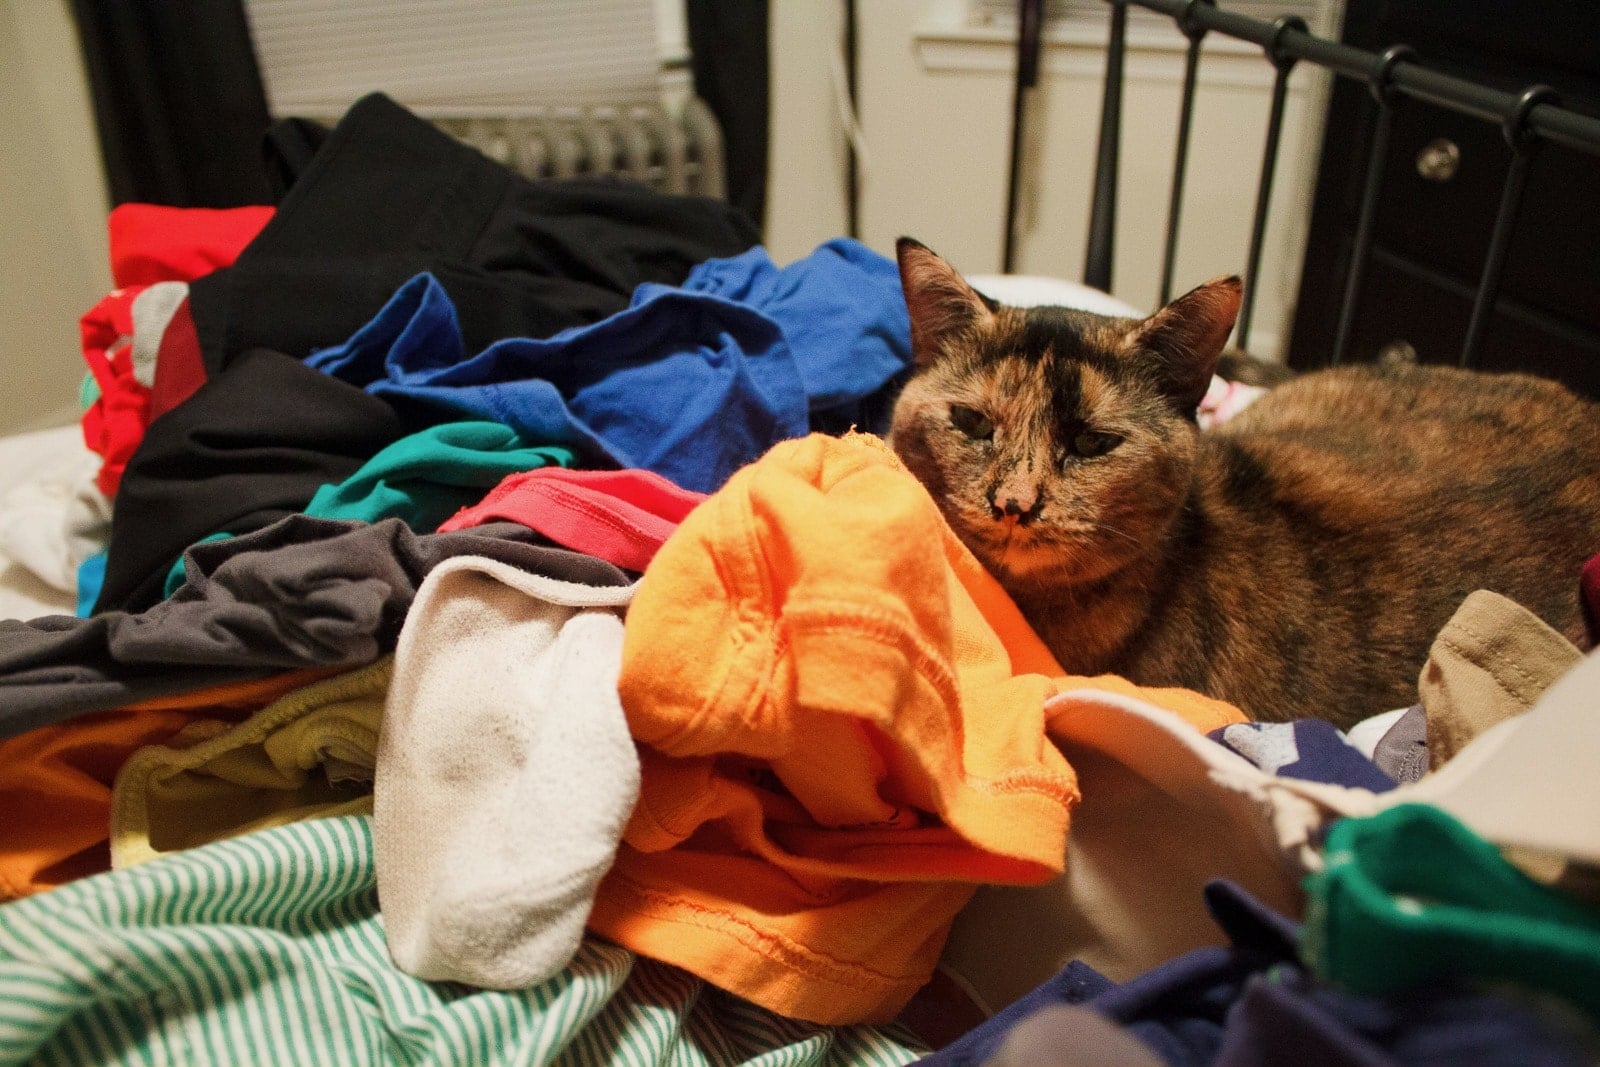 Leela laying in the laundry